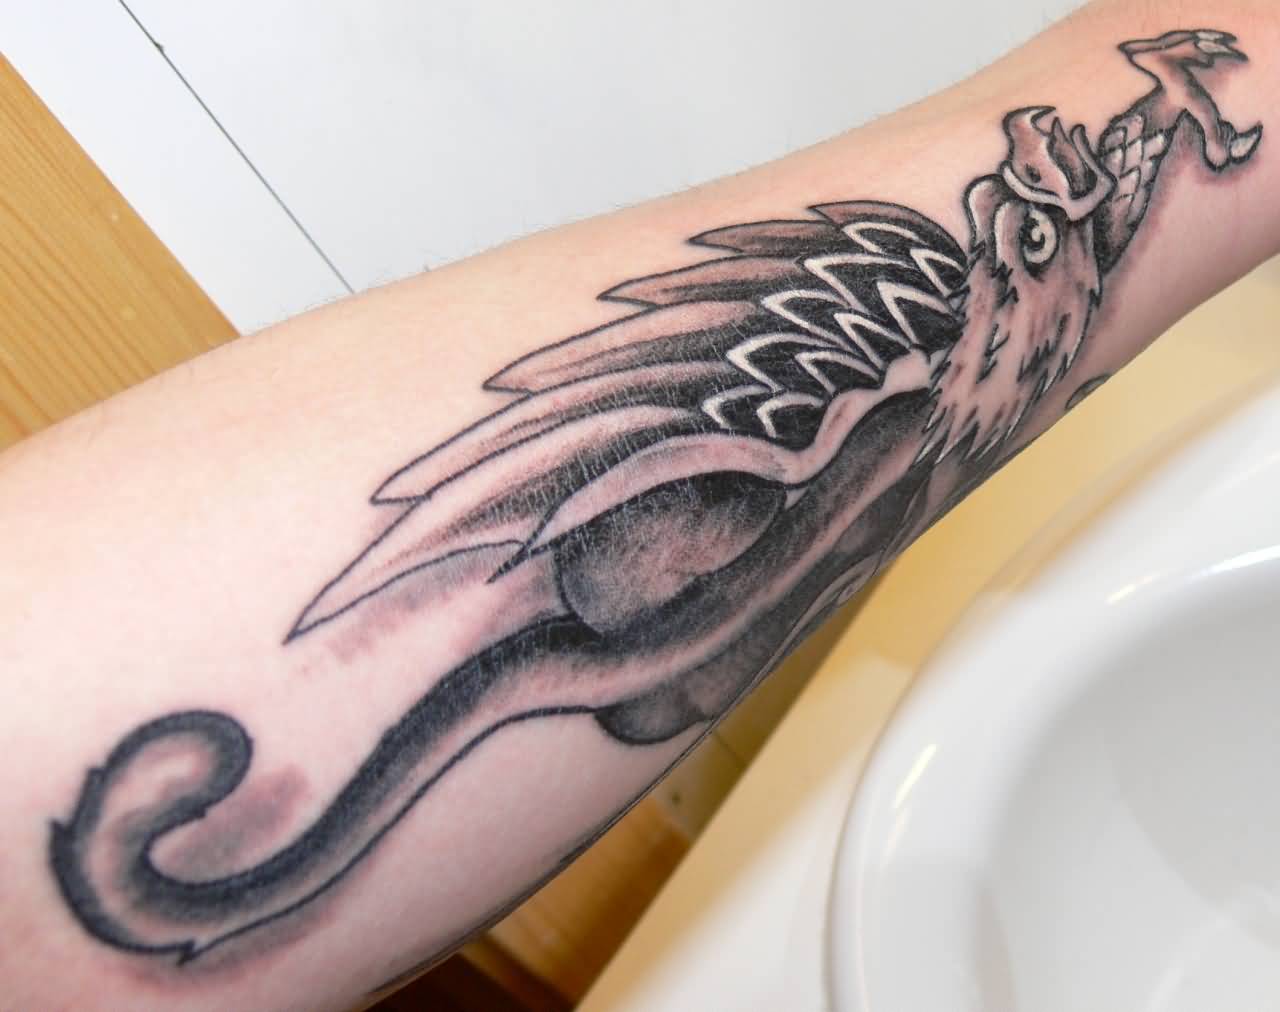 Brilliant Flying Griffin Tattoo On Forearm